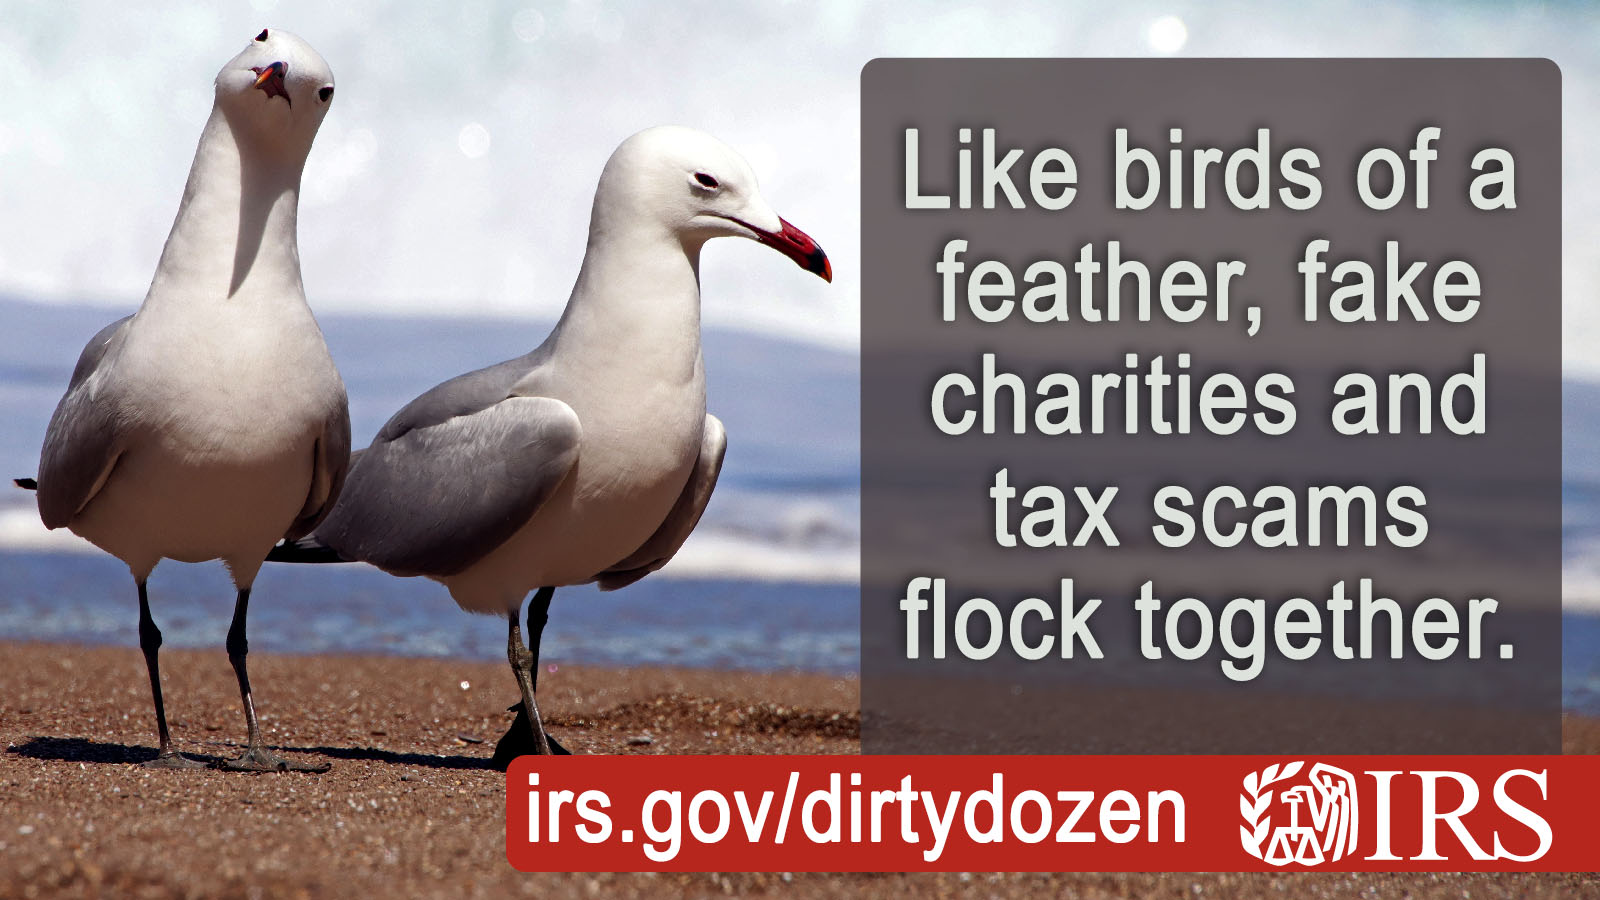 Two seagulls at the beach. IRS logo. Text: Like birds of a feather, fake charities and tax scams flock together. Irs.gov/dirtydozen